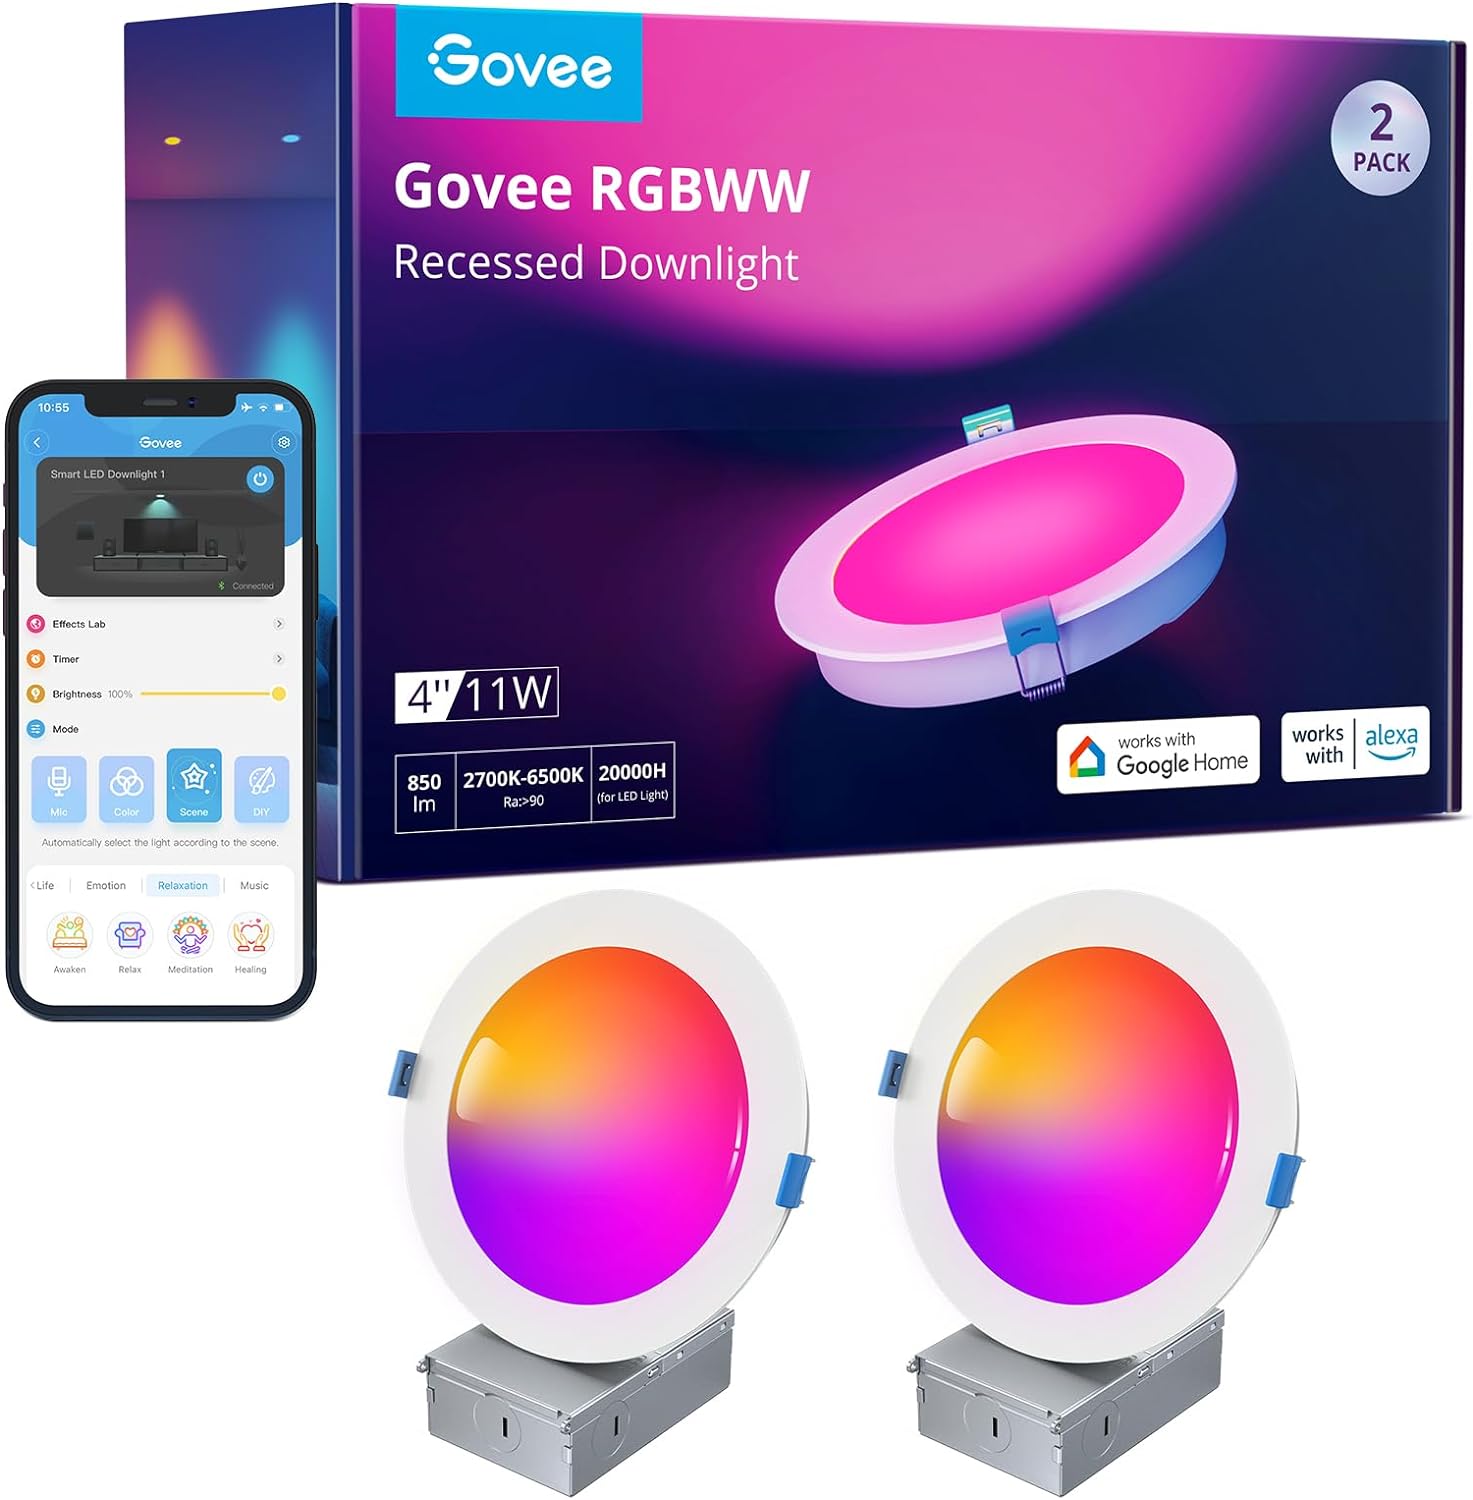 Govee Smart Recessed Lighting 4 Inch, Wi-Fi Bluetooth Direct Connect RGBWW LED Downlight, 65 Scene Mode, Work with Alexa & Google Assistant, LED Recessed Lighting with Junction Box, 850 Lumen, 2 Pack